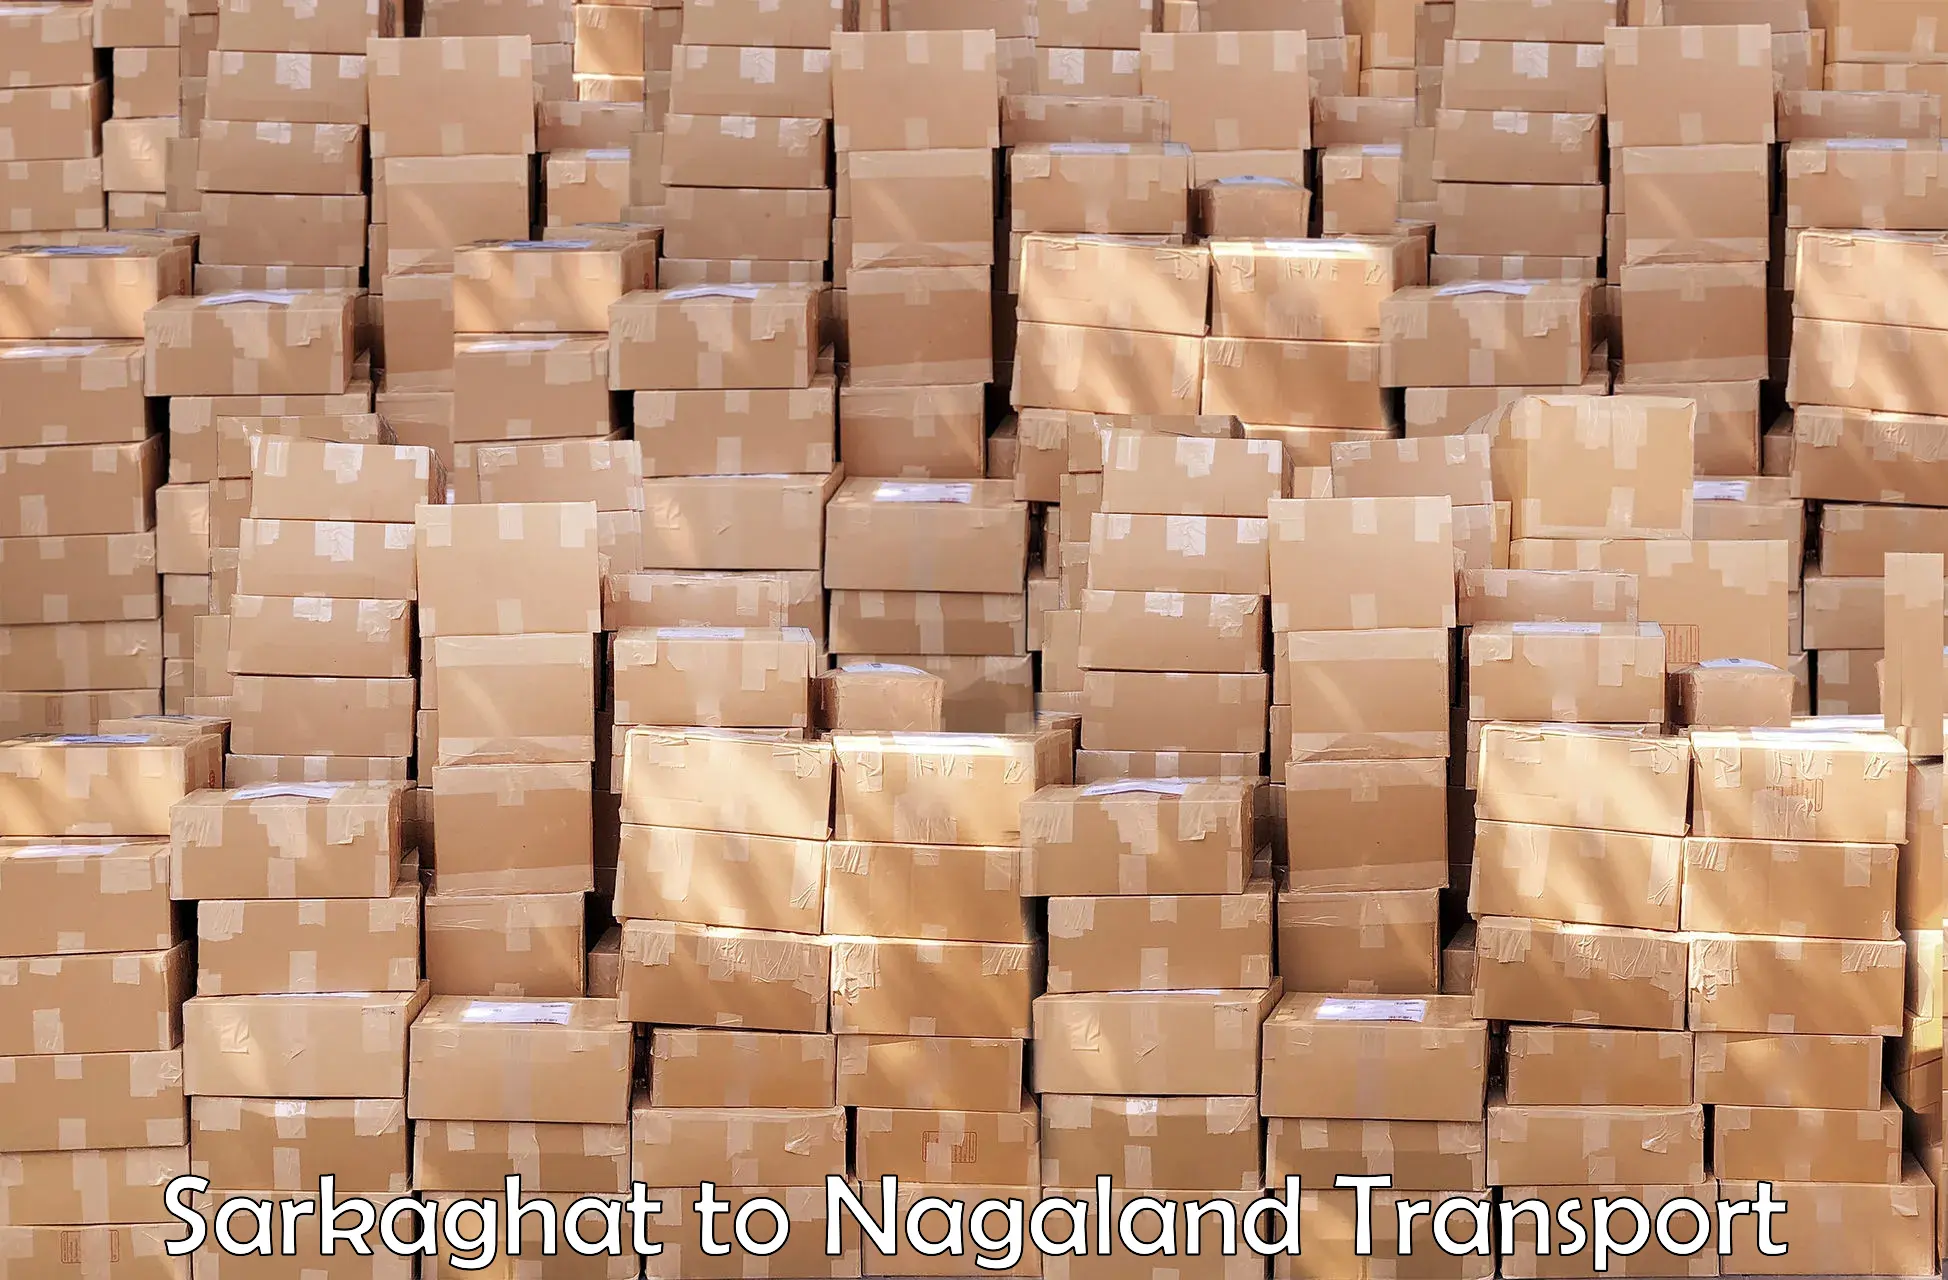 Transportation services in Sarkaghat to Nagaland